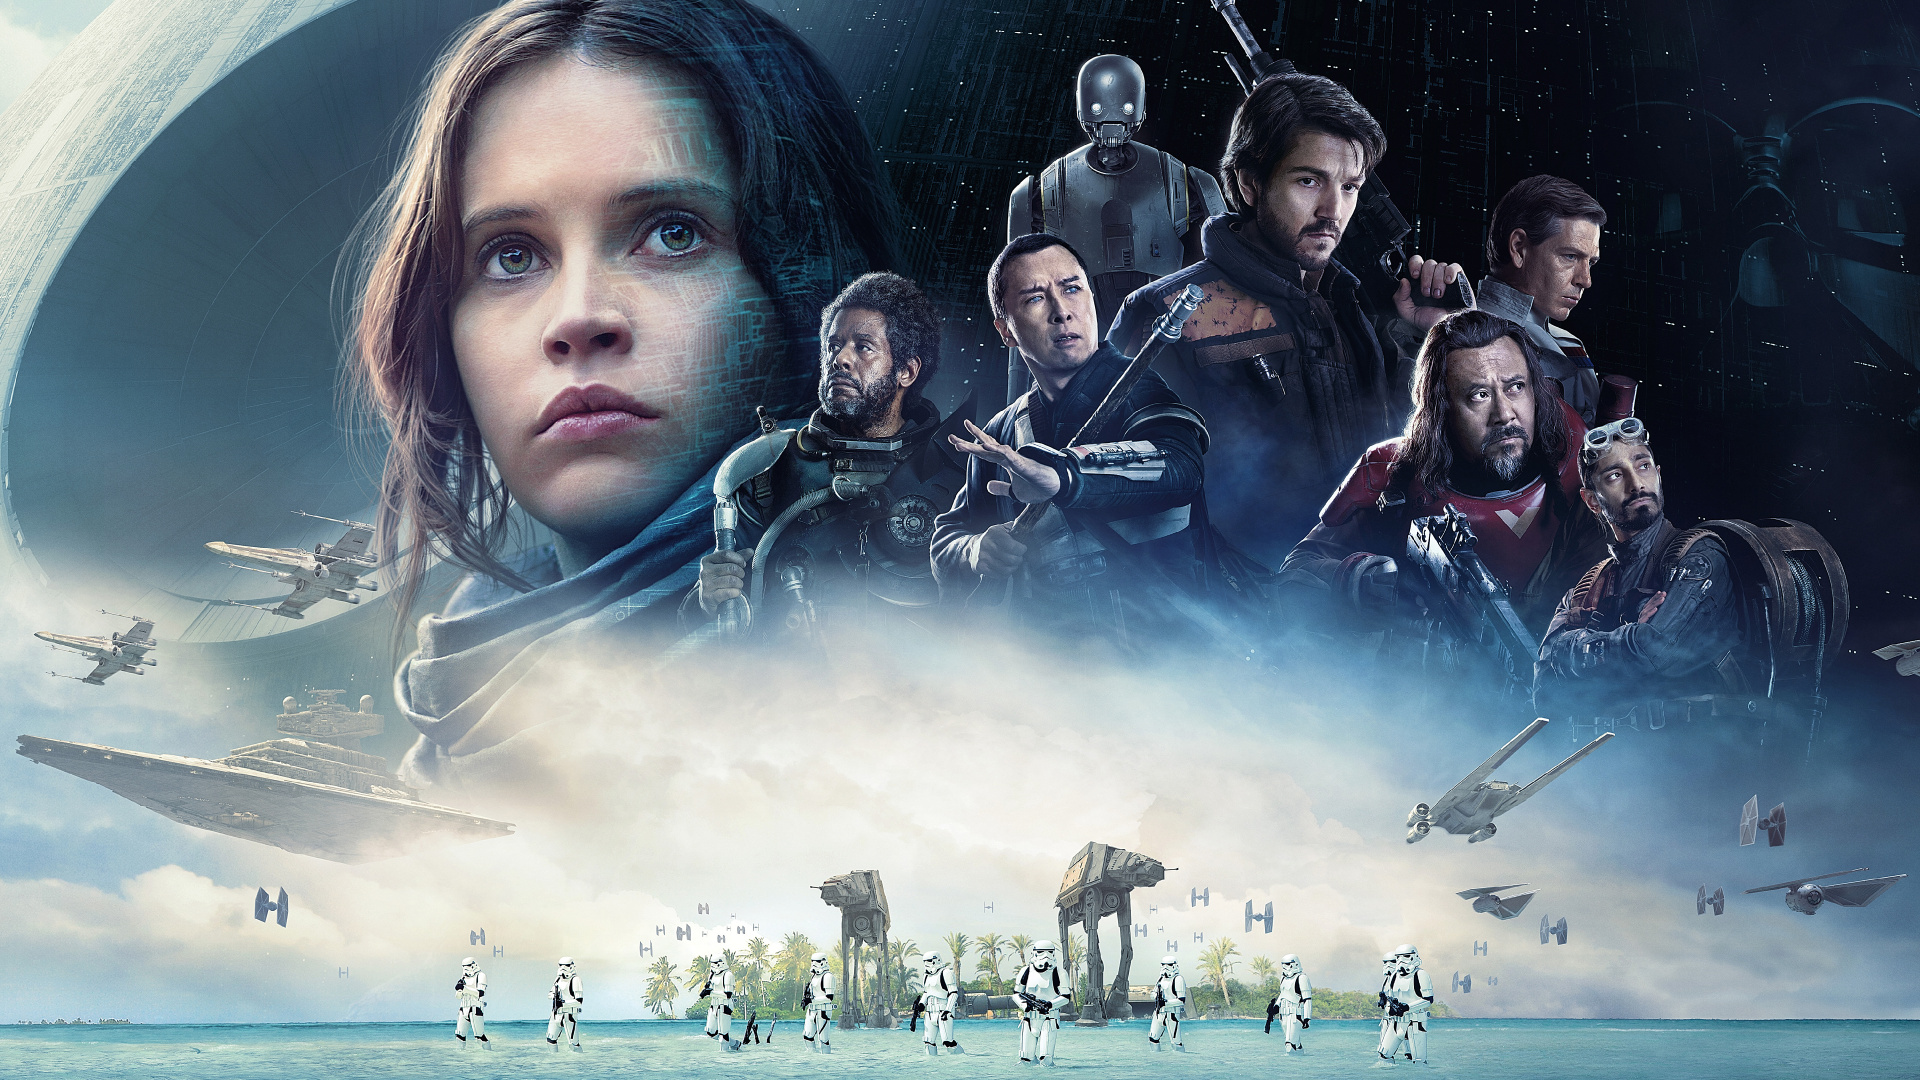 Gareth Edwards, Rogue One A Star Wars Story, Film, Monsters, Star Wars. Wallpaper in 1920x1080 Resolution